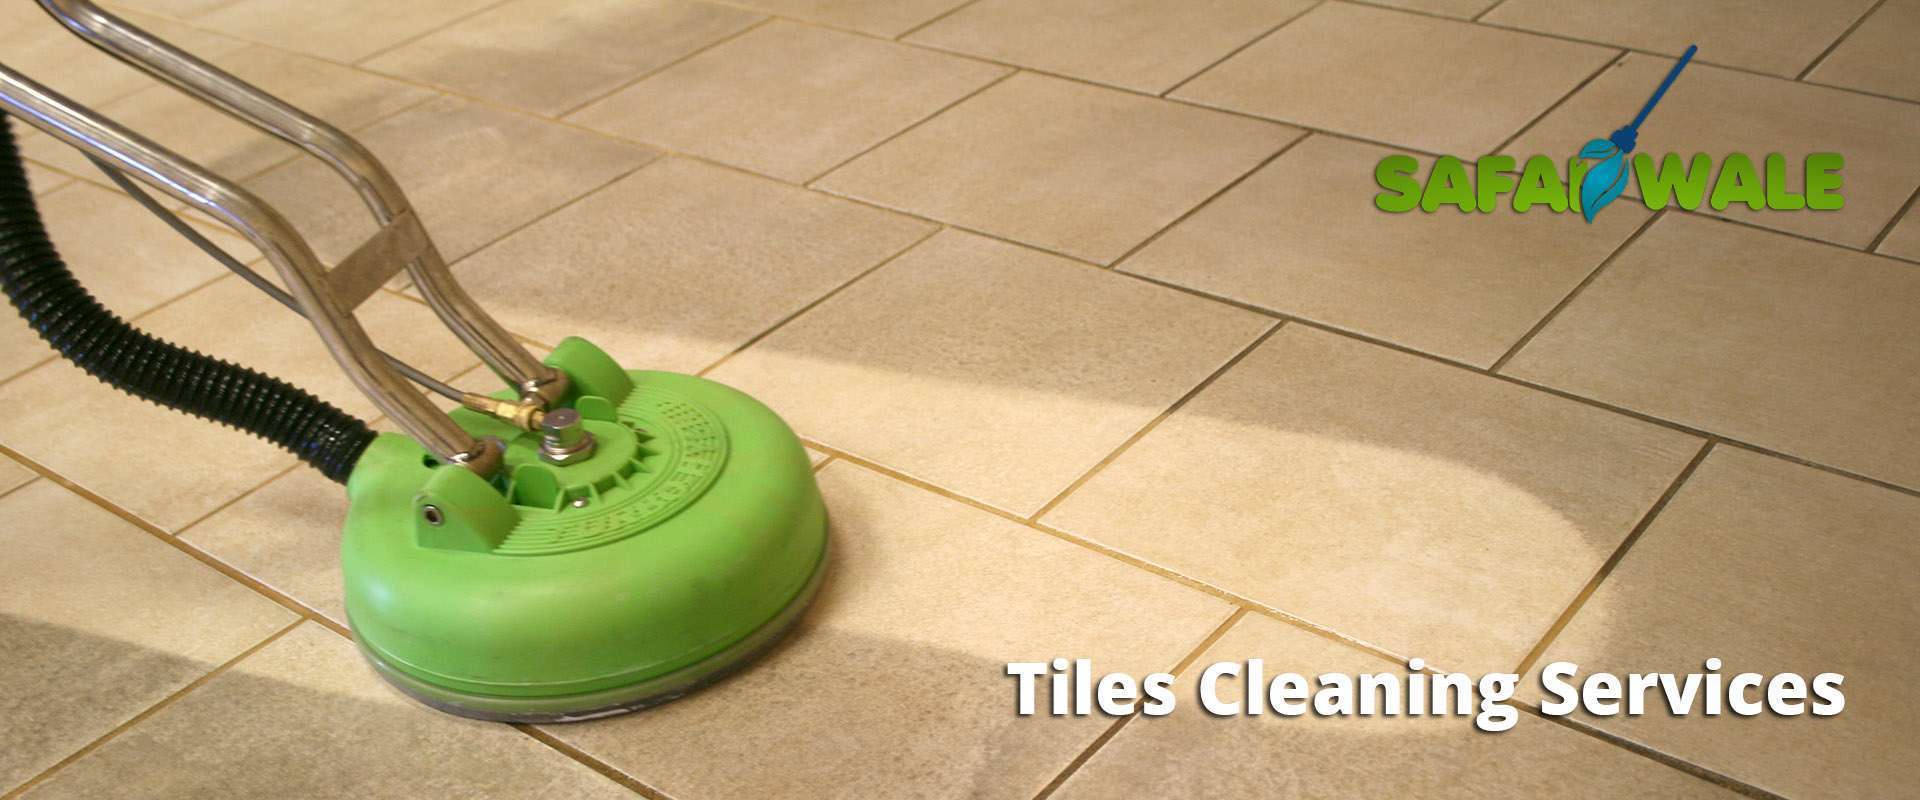 Tiles Cleaning Services In Mumbai